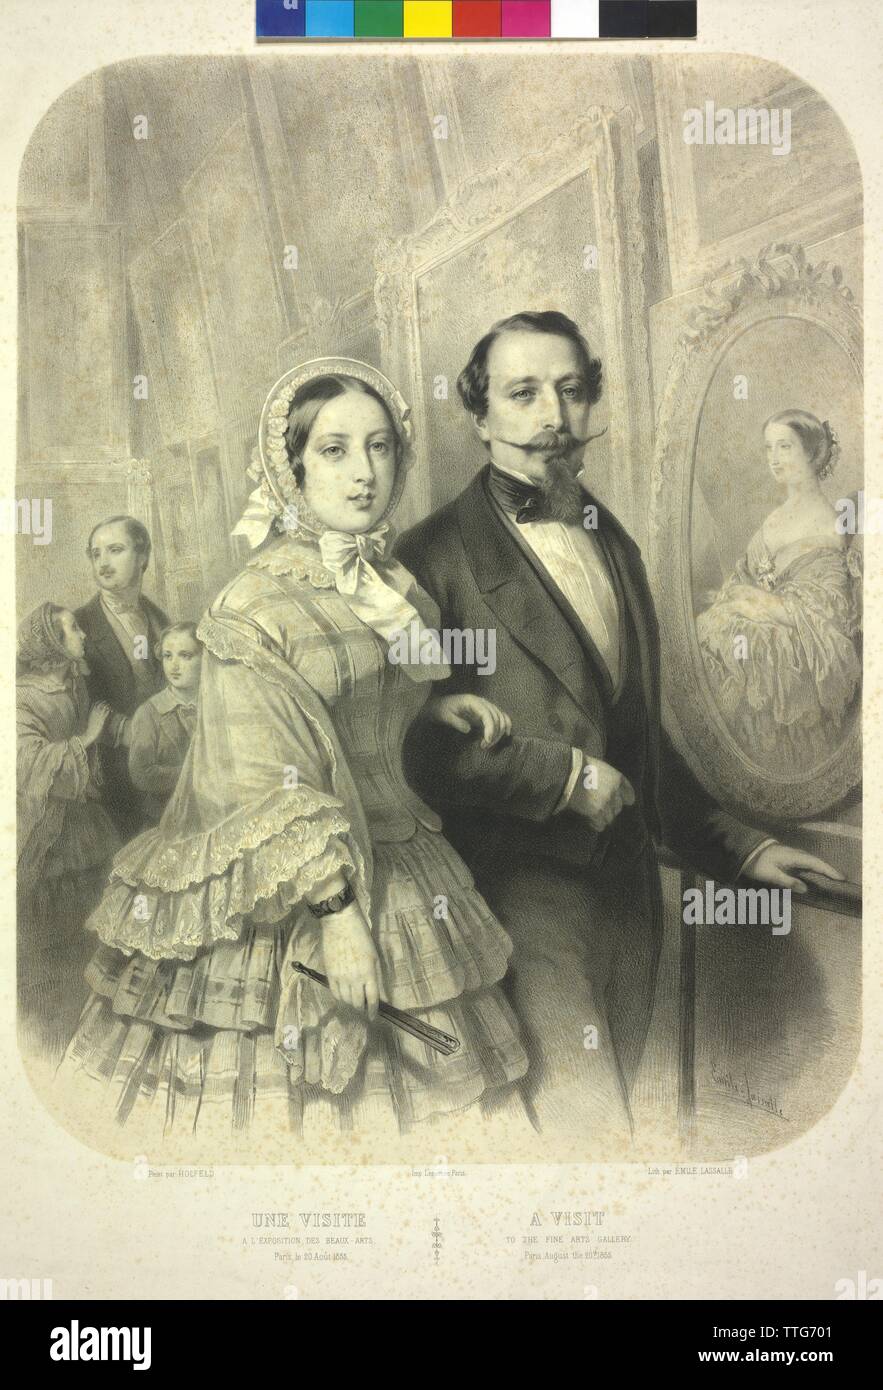 world exposition in Paris, 1855, Queen Victoria of England and Emperor Napoleon III of France, come see on 20.8.1855 the art exhibition in the Palais of the Beaux-Arts. left-wing her husband Albert, prince of Saxe-Coburg-Gotha with the both children princess Victoria and Albert Edward, Prince of Wales (succeeding Eduard VII, King of England), on the right at the wall of a picture von Eugenie, empress of France (painting by Franz Xavier Winterhalter), lithograph by Emile Lassalle based on a painting by Dominique Hippolyte Holfeld, Additional-Rights-Clearance-Info-Not-Available Stock Photo